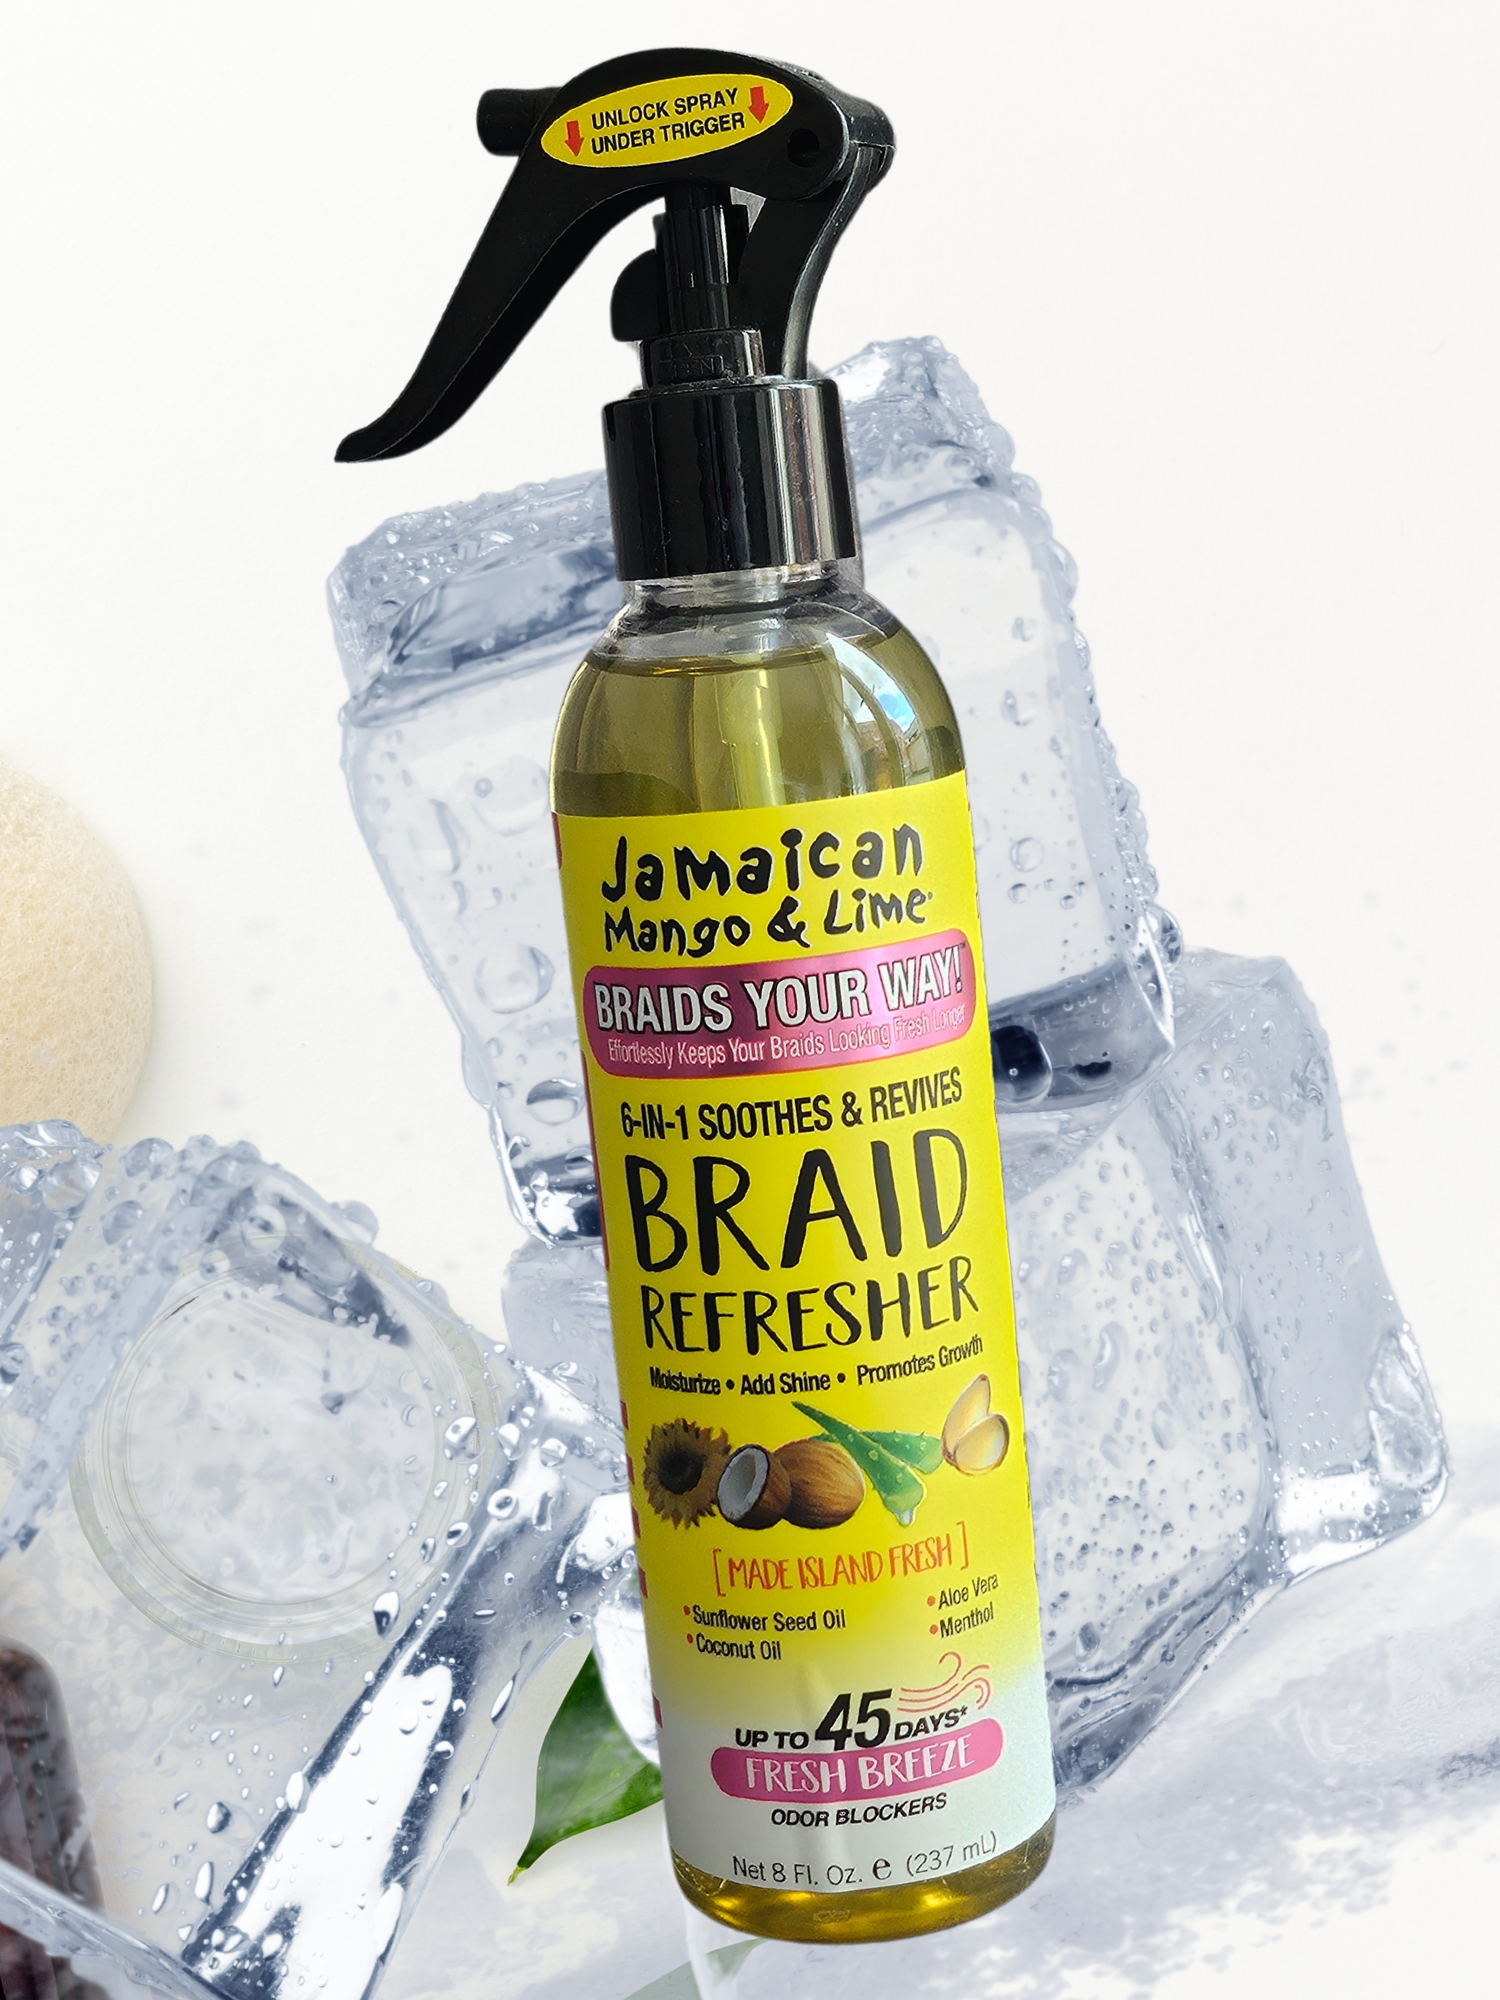 Jamaican Mango & Lime - Braid Your Way 6-in-1 Soothes & Revives Braid Refresher